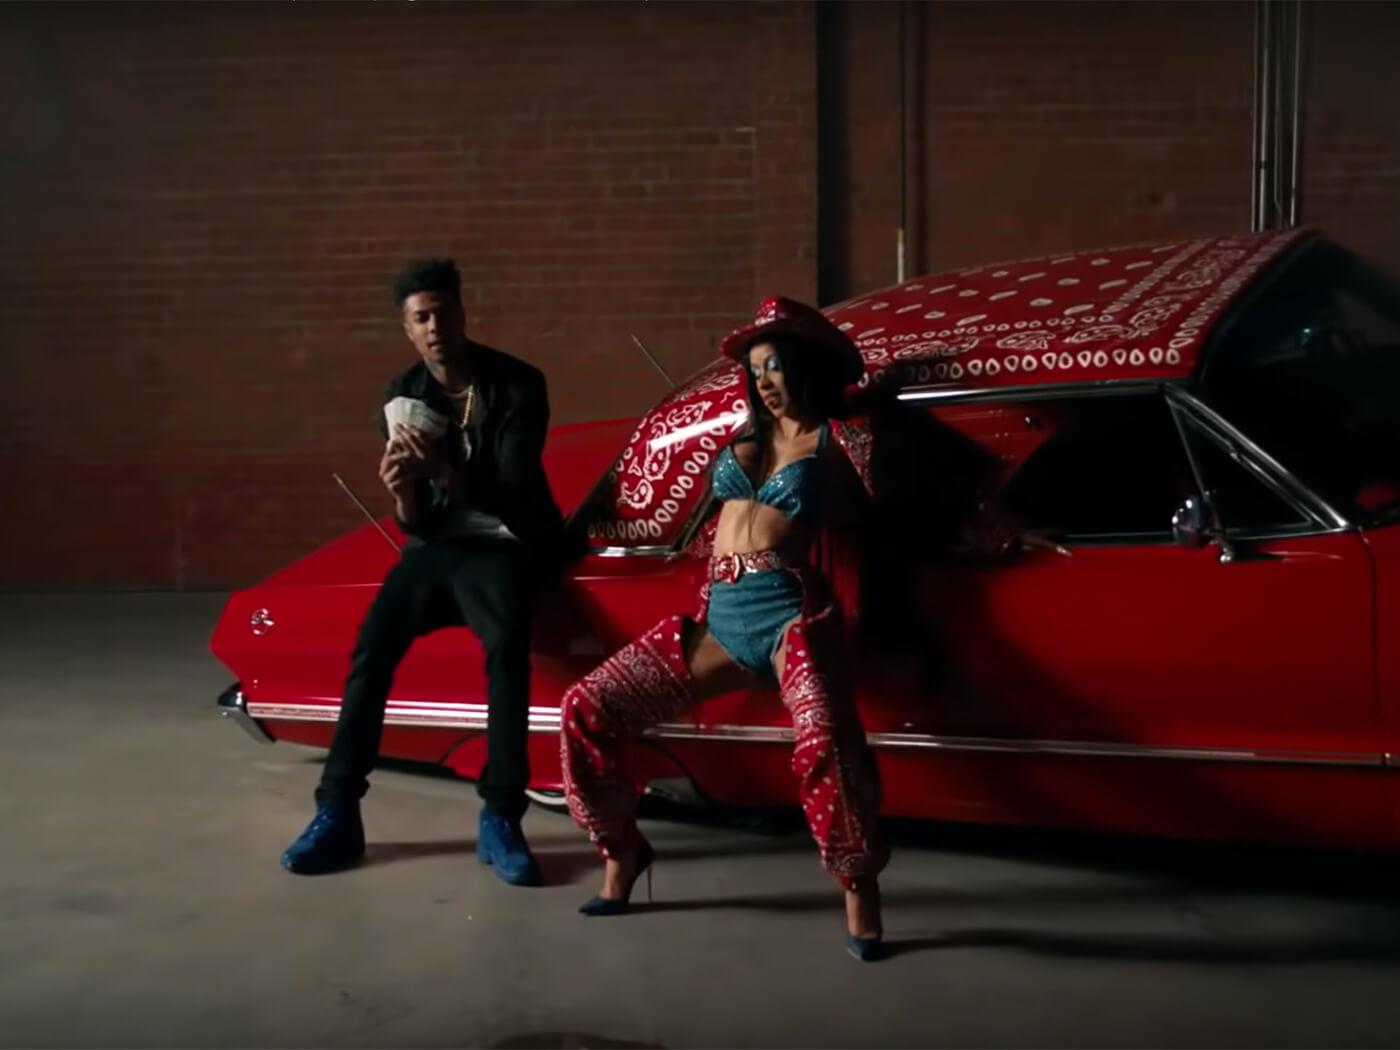 Watch Cardi B bust down with Blueface on her "Thotiana" remix.